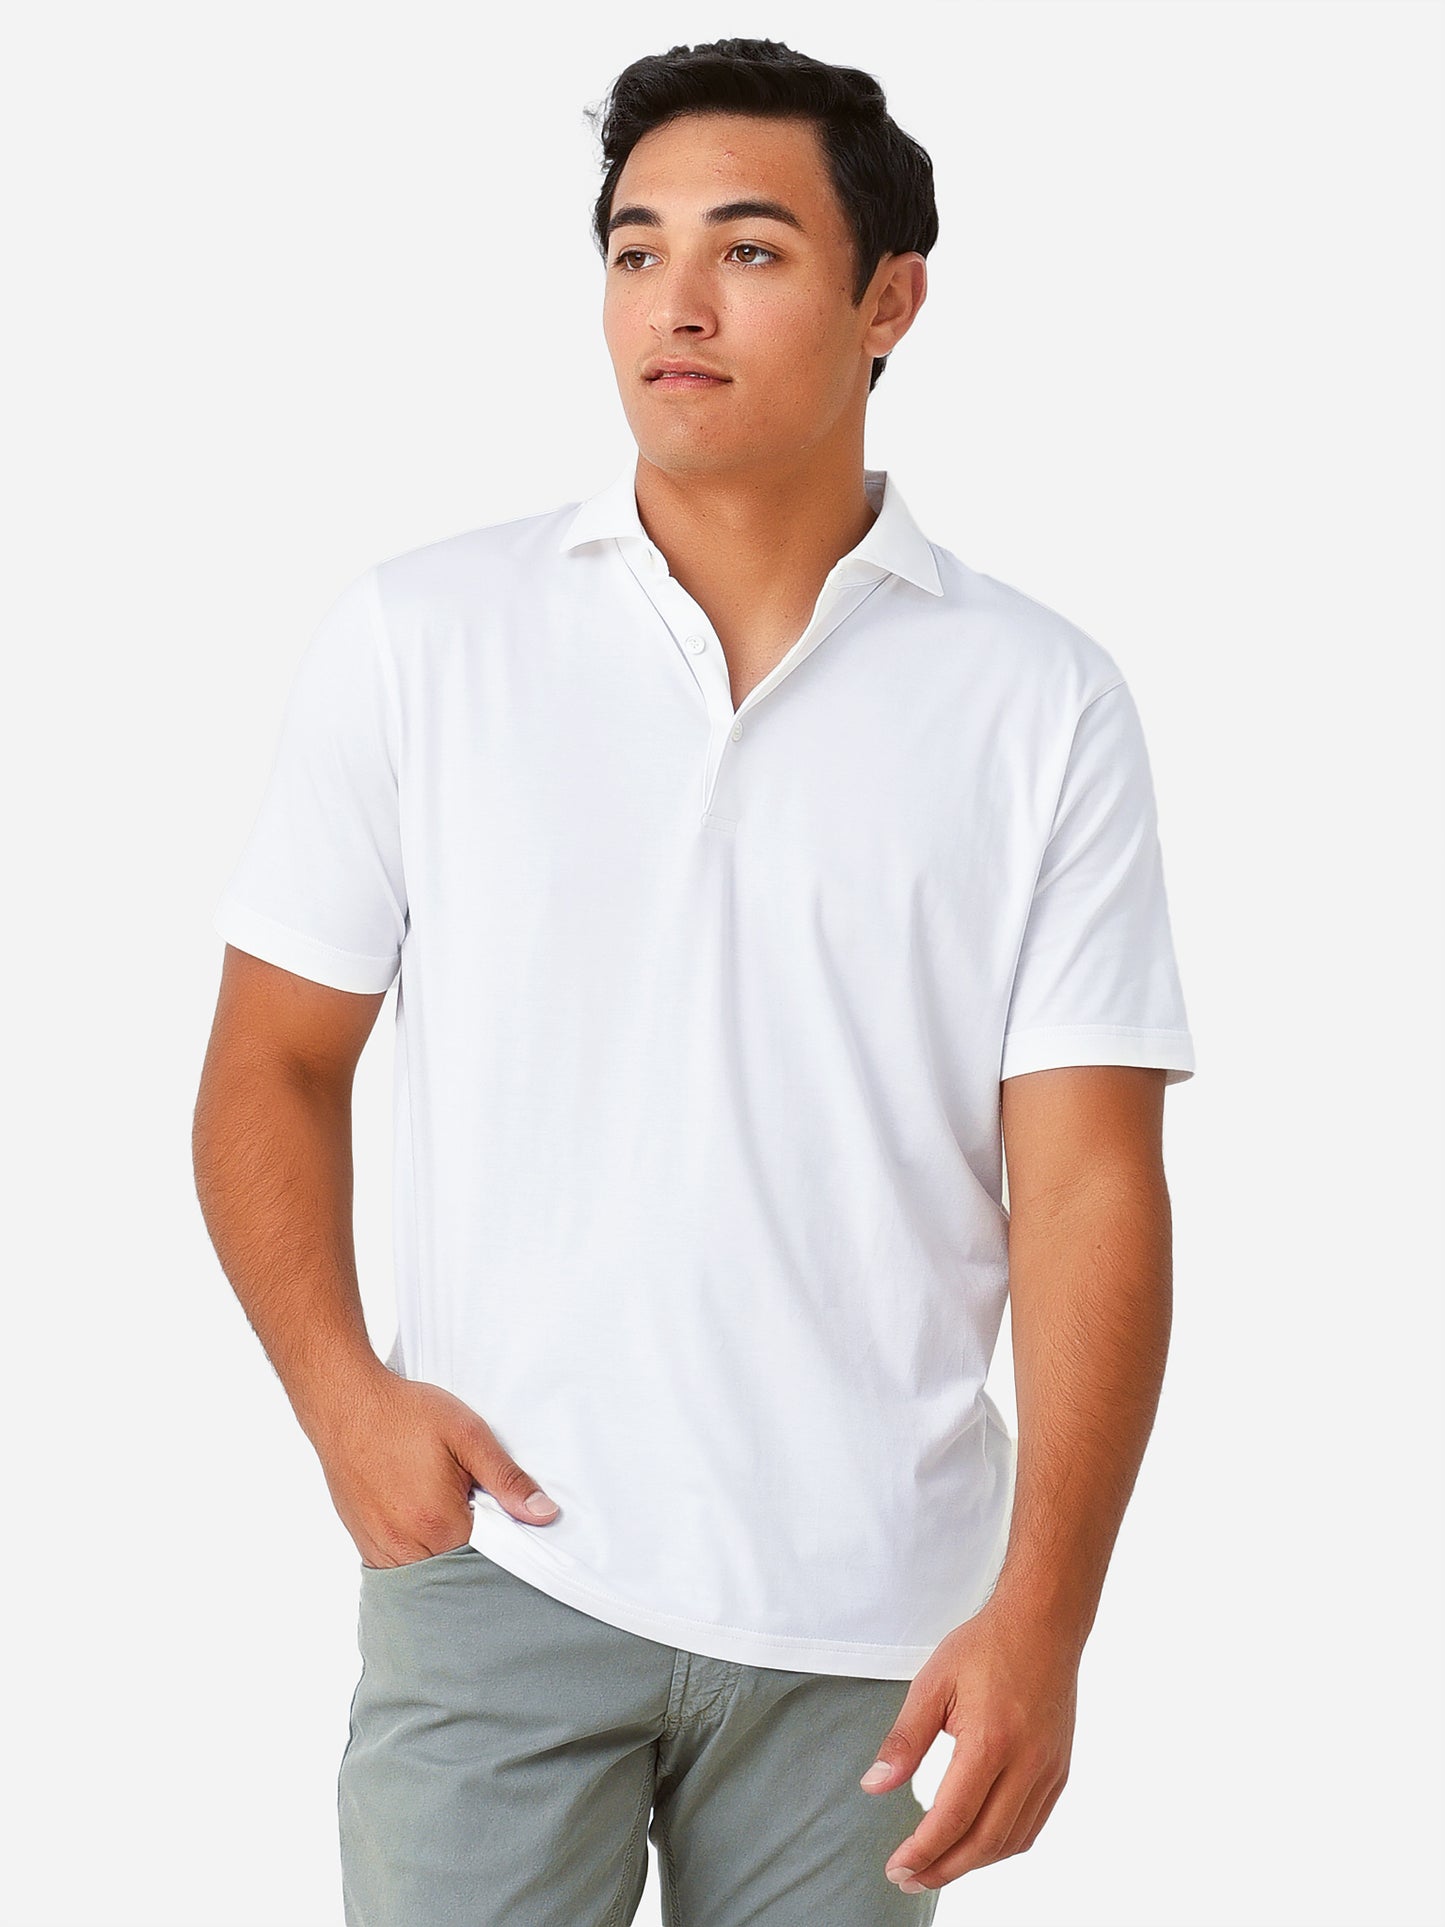 Peter Millar Crown Crafted Men's Excursionist Flex Polo